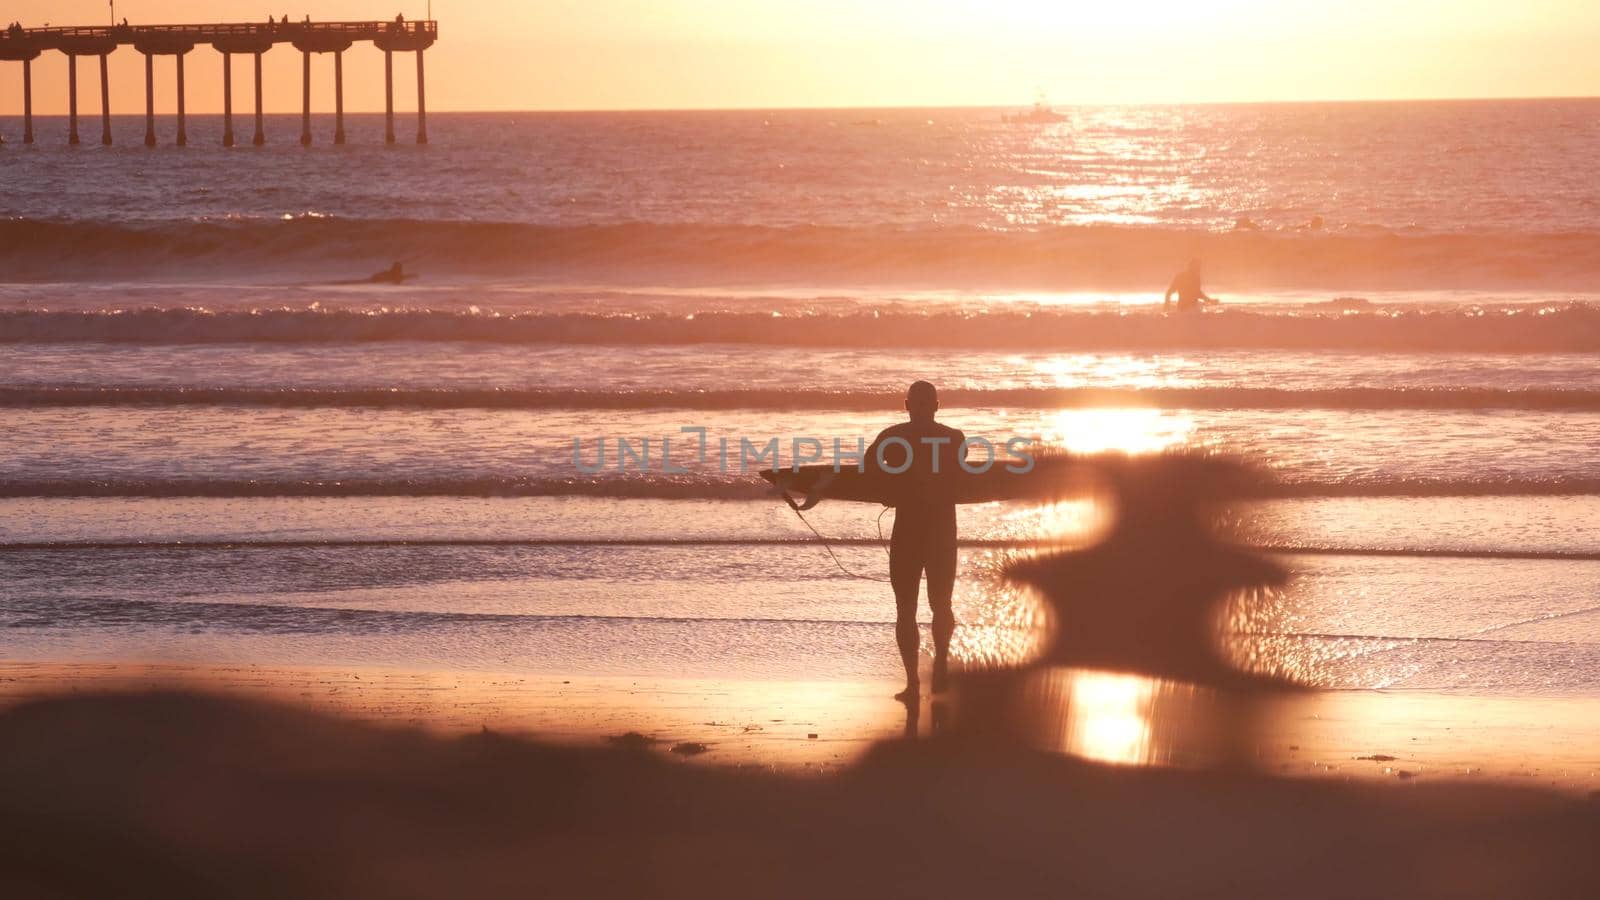 San Diego, California USA - 28 Nov 2020: People surfing by Ocean Beach pier on piles at sunset. Surfers on surfboards in water waves. Vacations on pacific coast or shore. Recreational sport hobby.